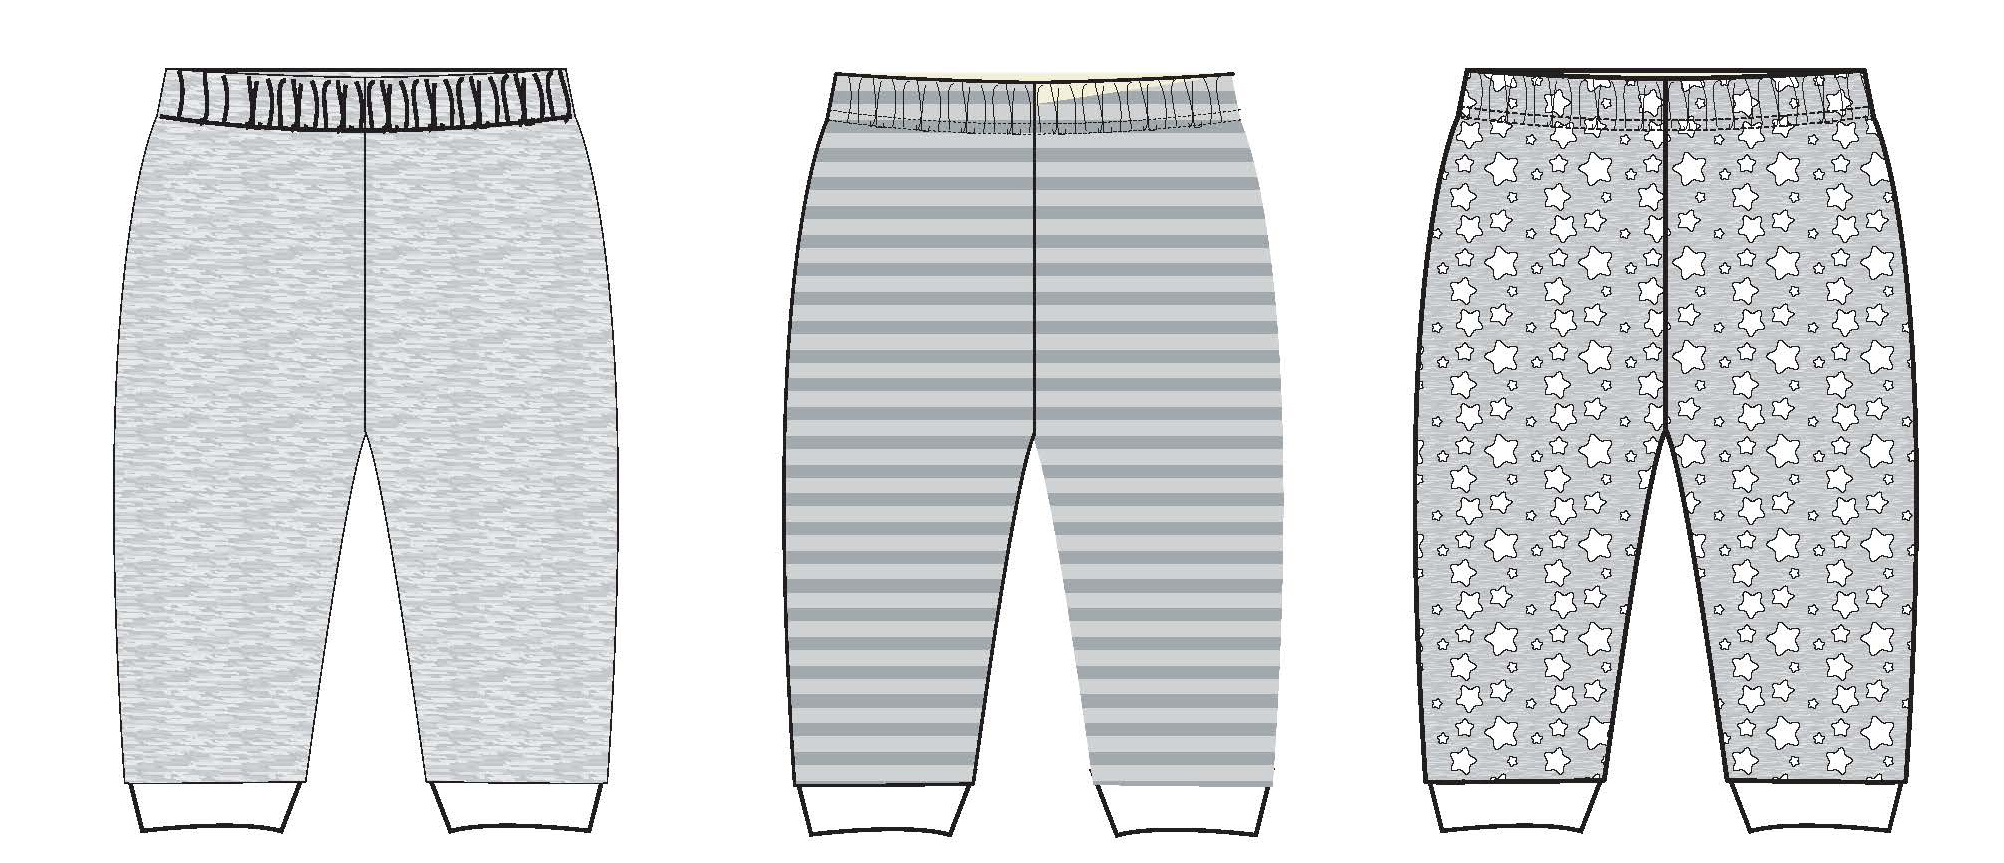 ''Gender Neutral Baby's Printed Pull-On PANTS w/ Striped, Heathered, & Star Print - Sizes 0/3M-9M''